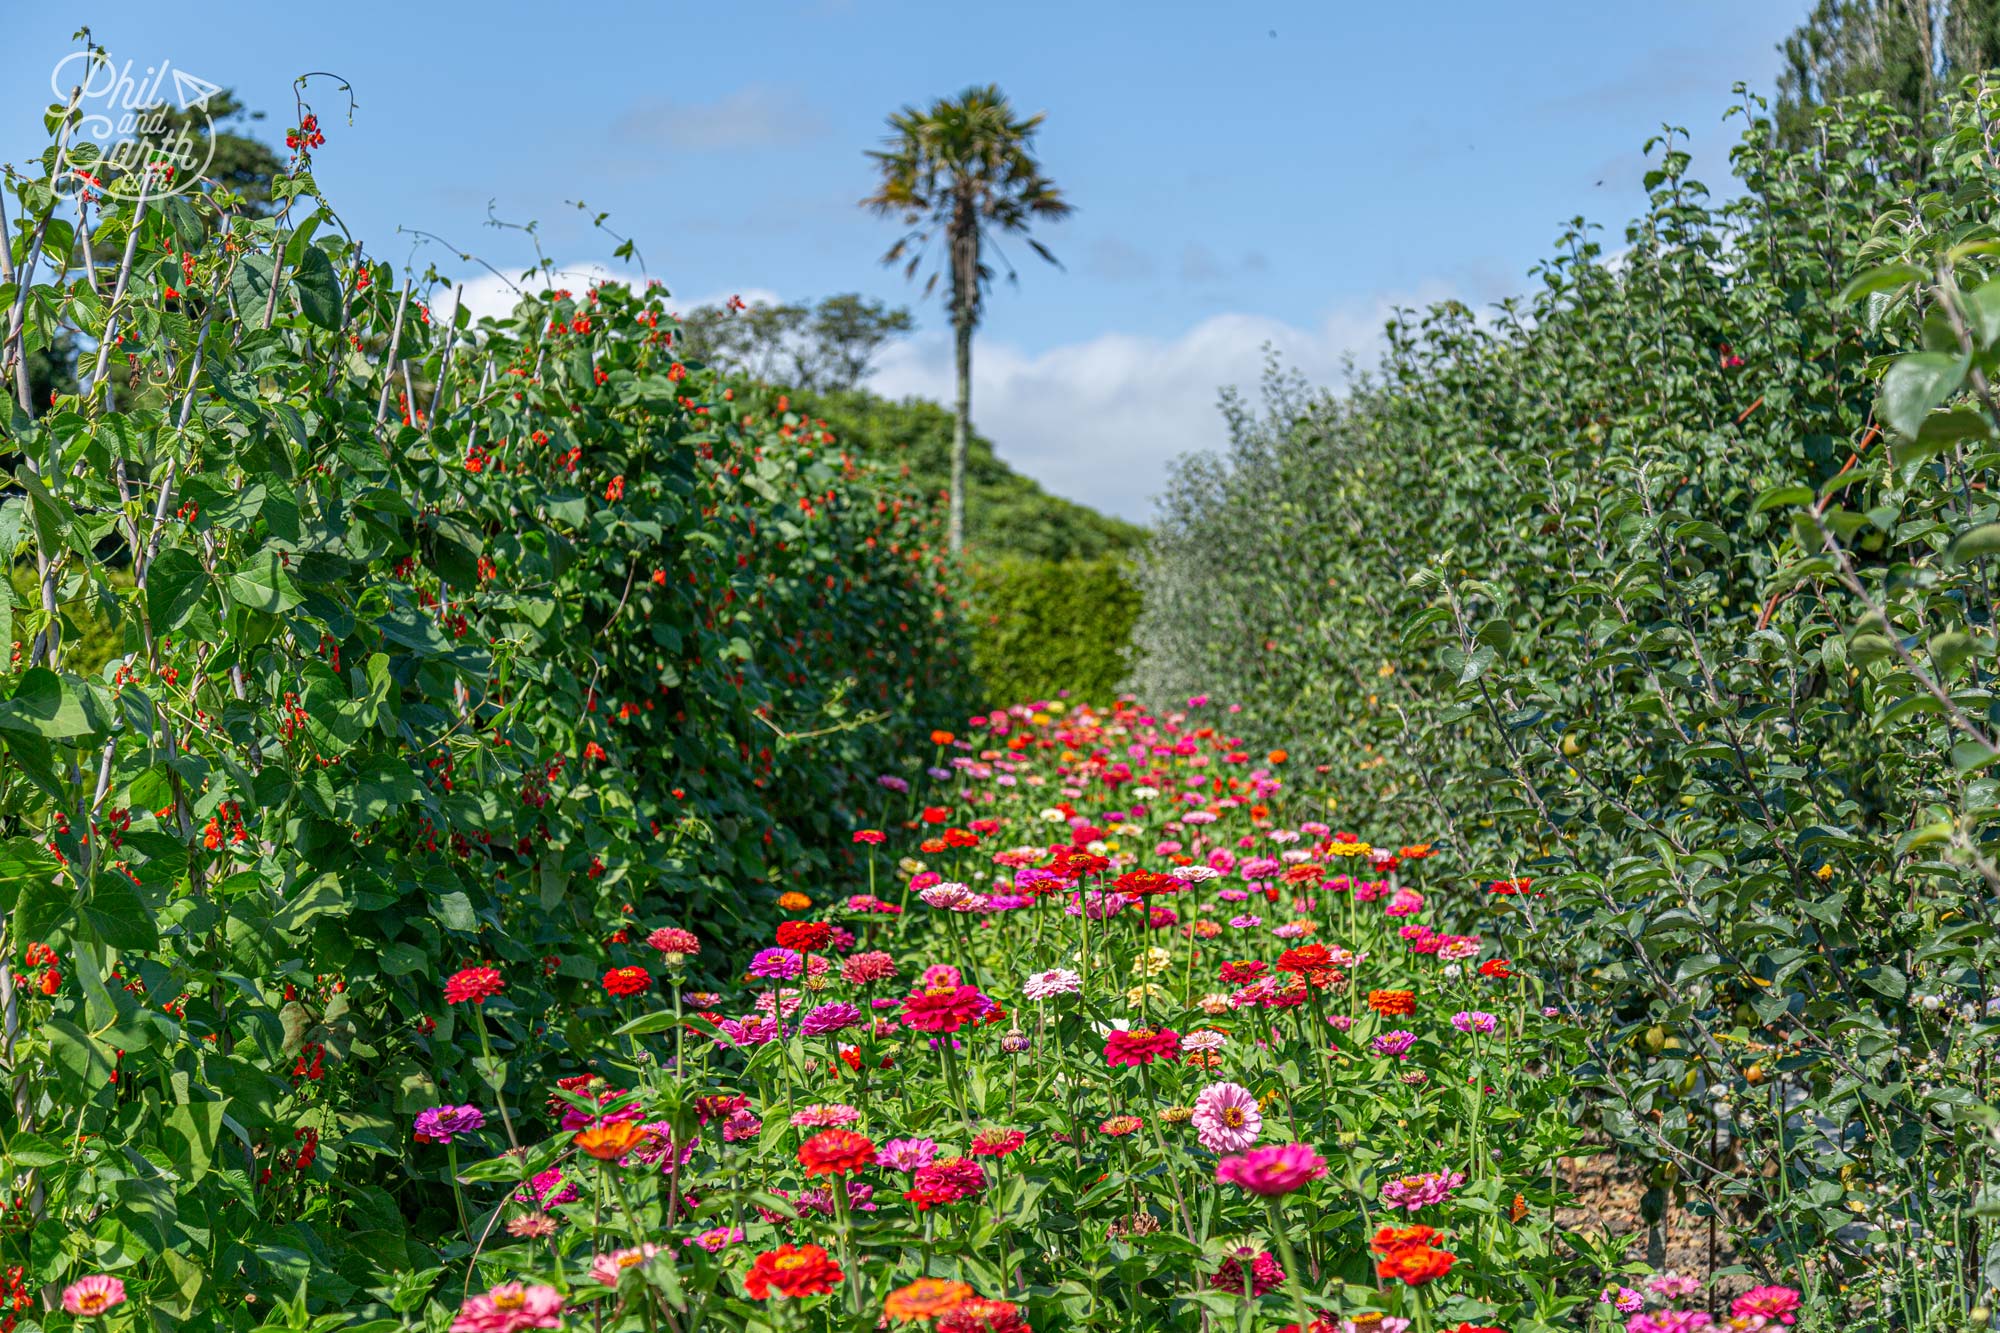 Rows of runner beans and flowers in Heligan's Kitchen Garden